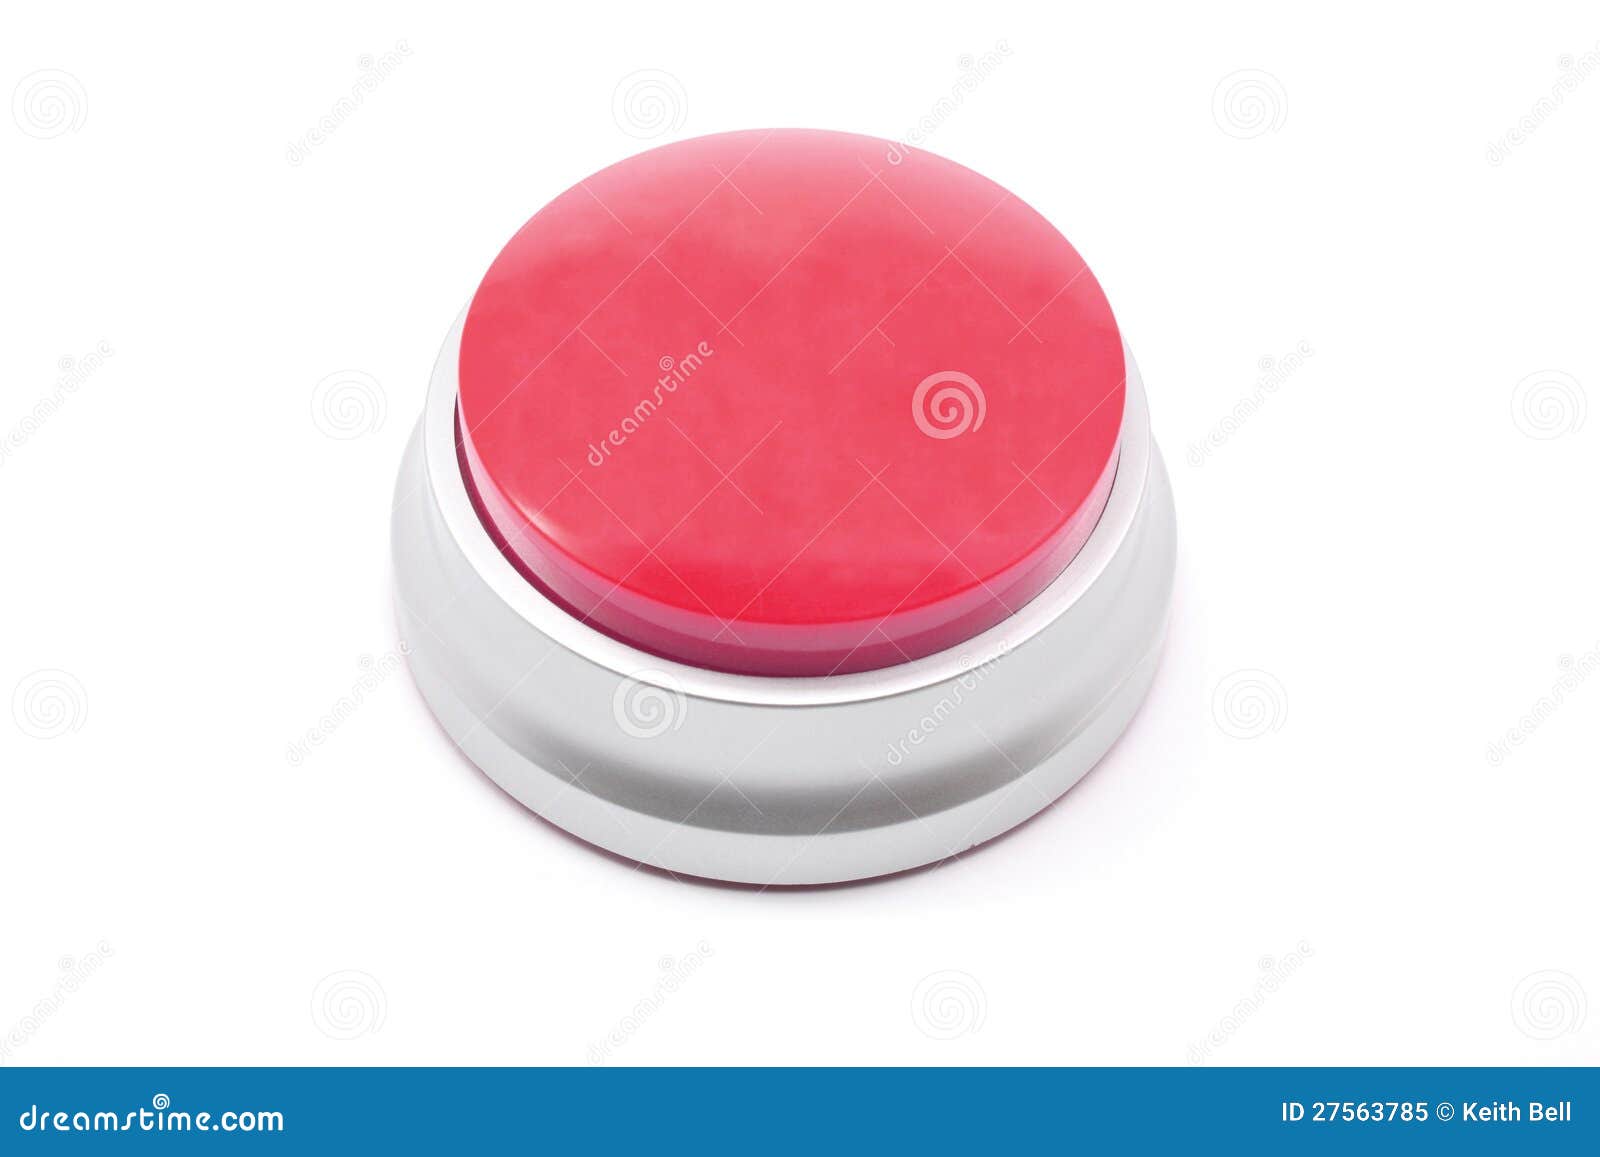 large ruby red button ready for your text